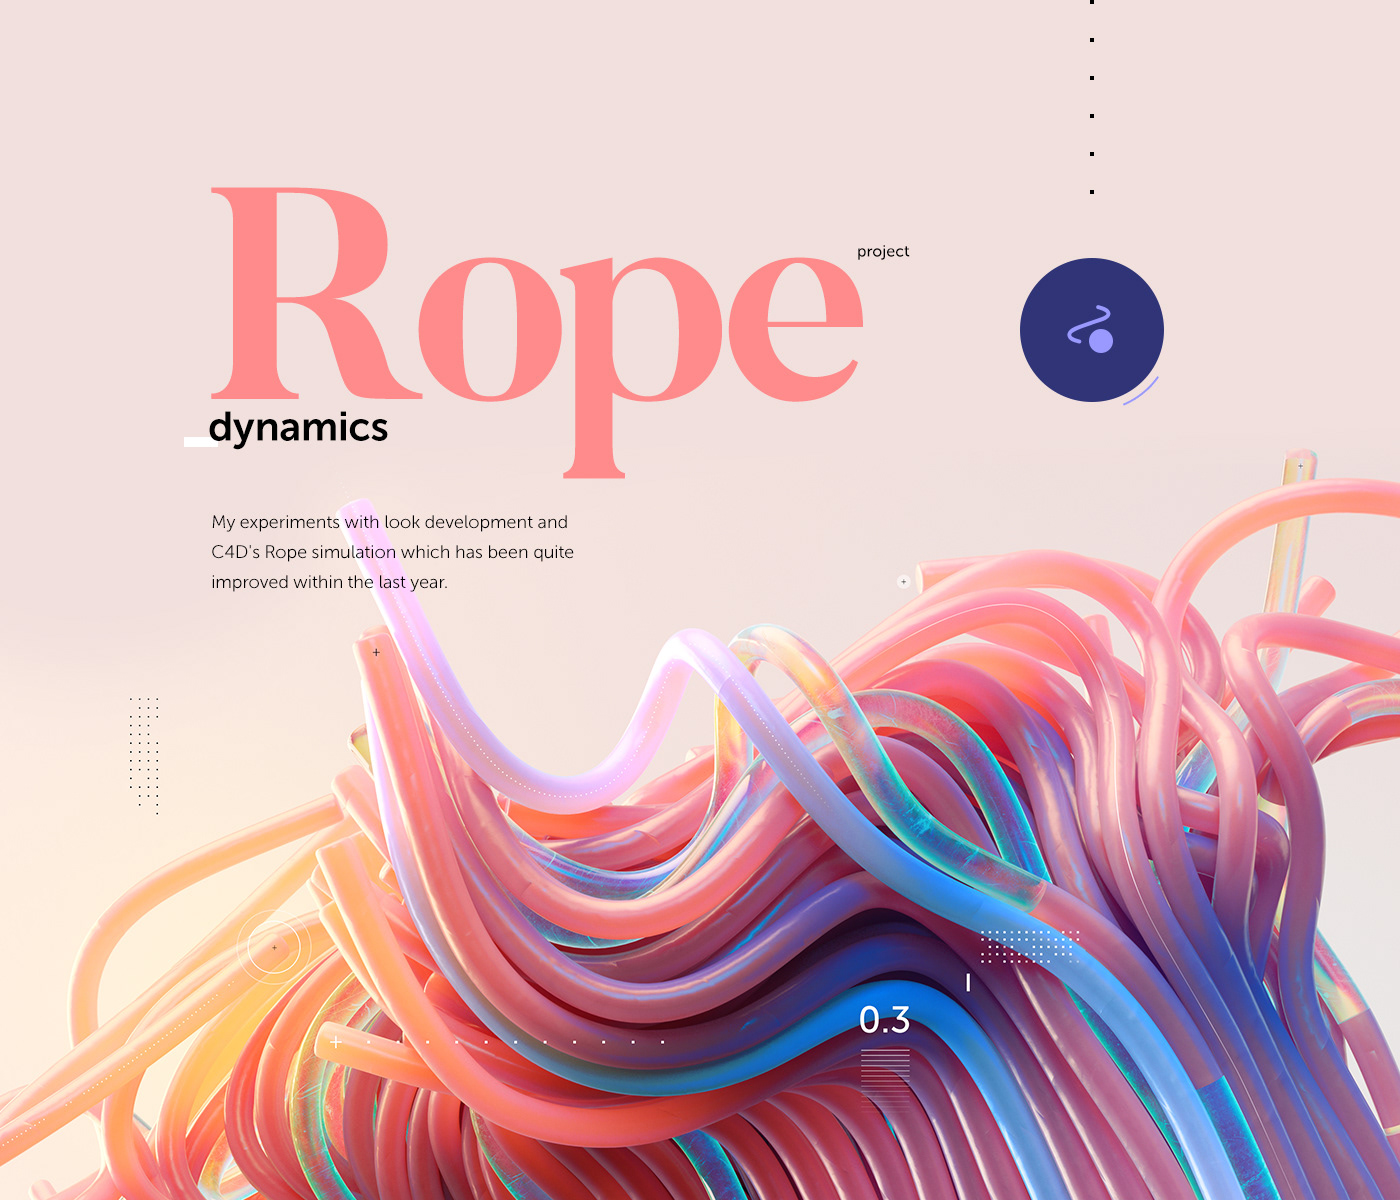 Rope Dynamics project is a non-commercial art project exploring C4D's rope simulation tool.